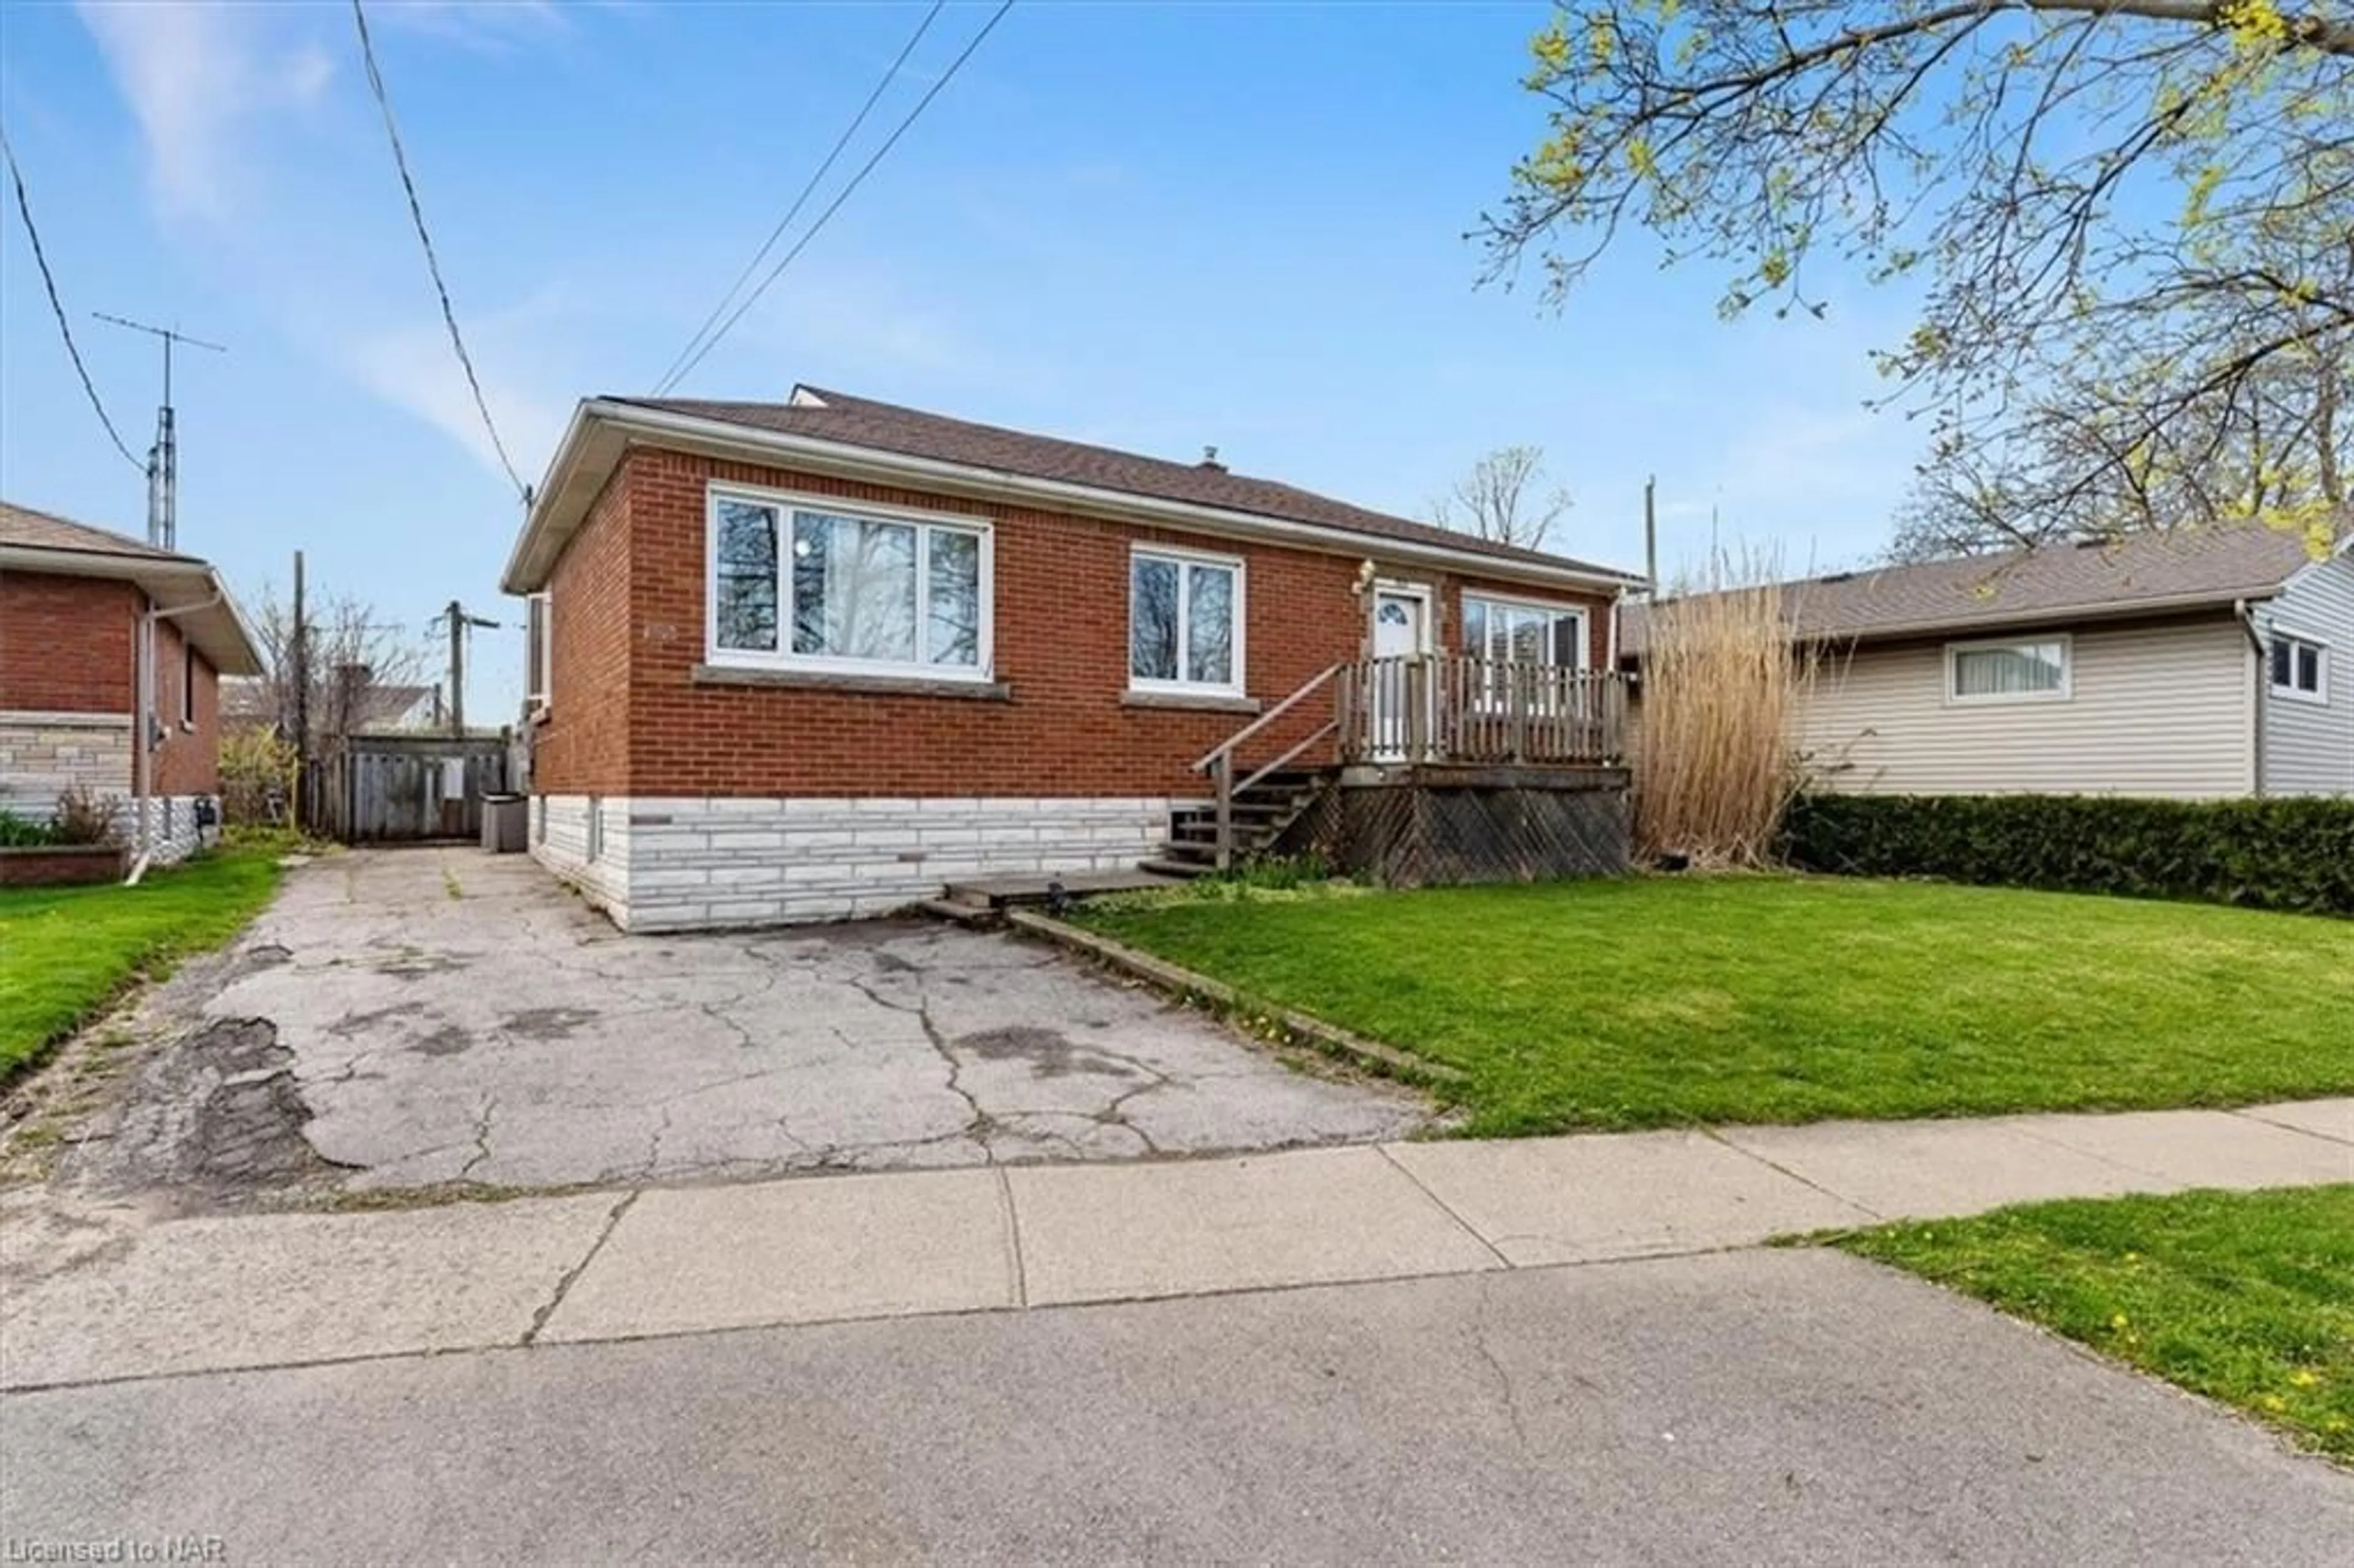 Frontside or backside of a home for 303 Grantham,Stca Ave, St. Catharines Ontario L2M 5A3